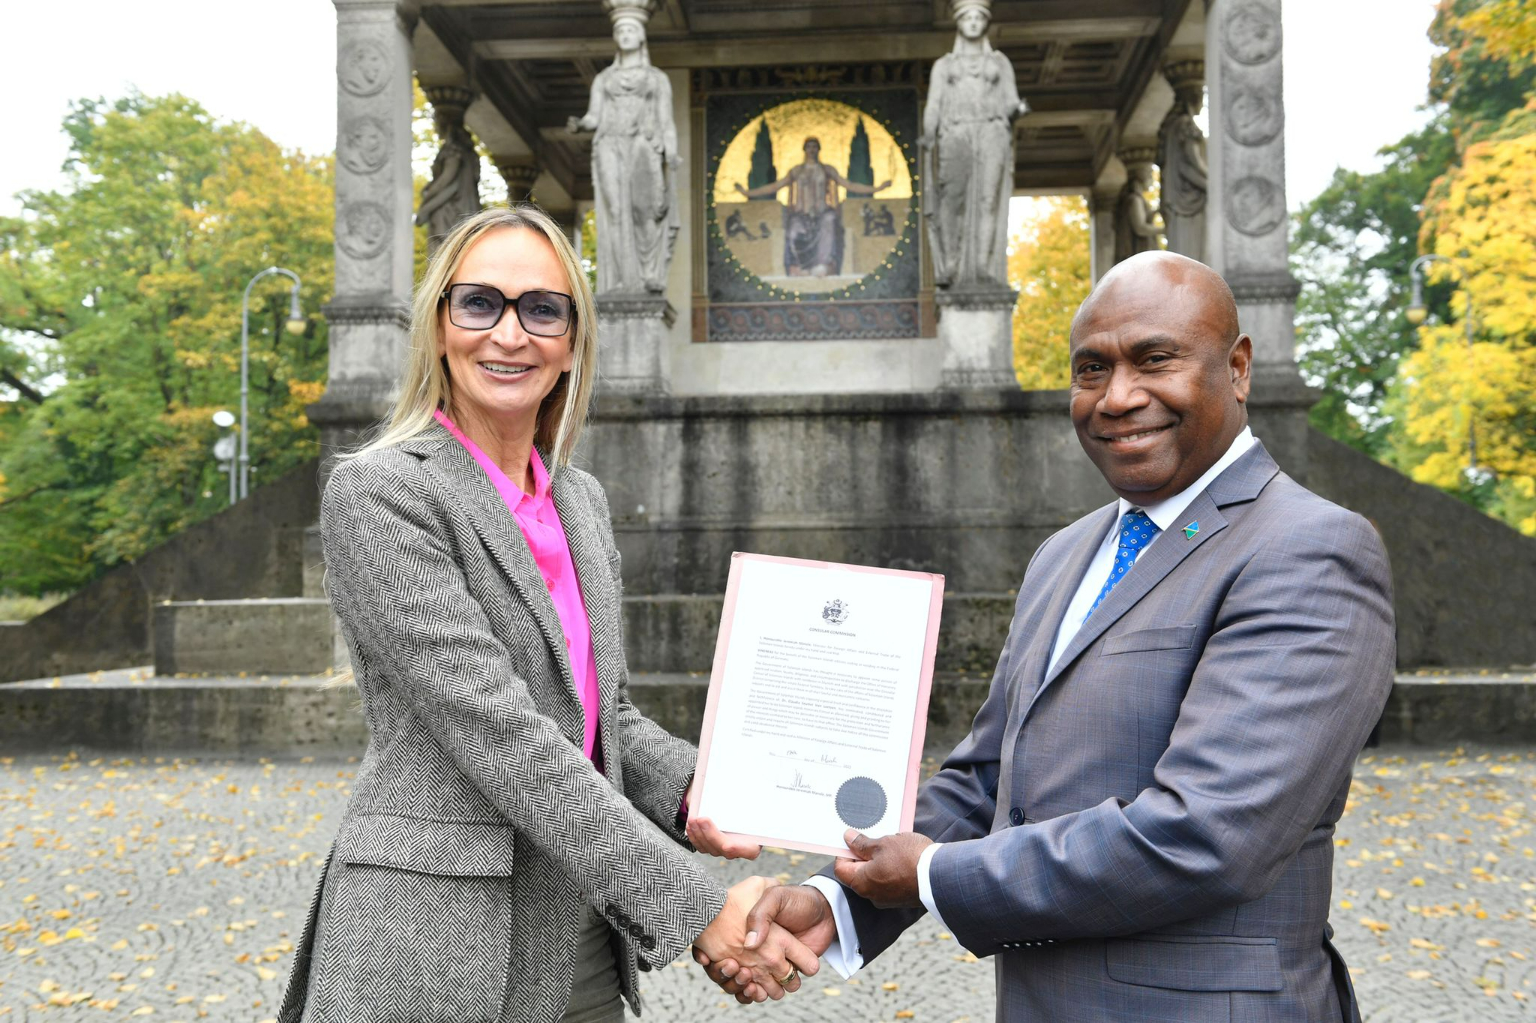 Ambassador H.E Moses Mose officiating the appointment of Dr. Claudia Seutter von Lötzen as the Honorary consul of Solomon Islands to Germany